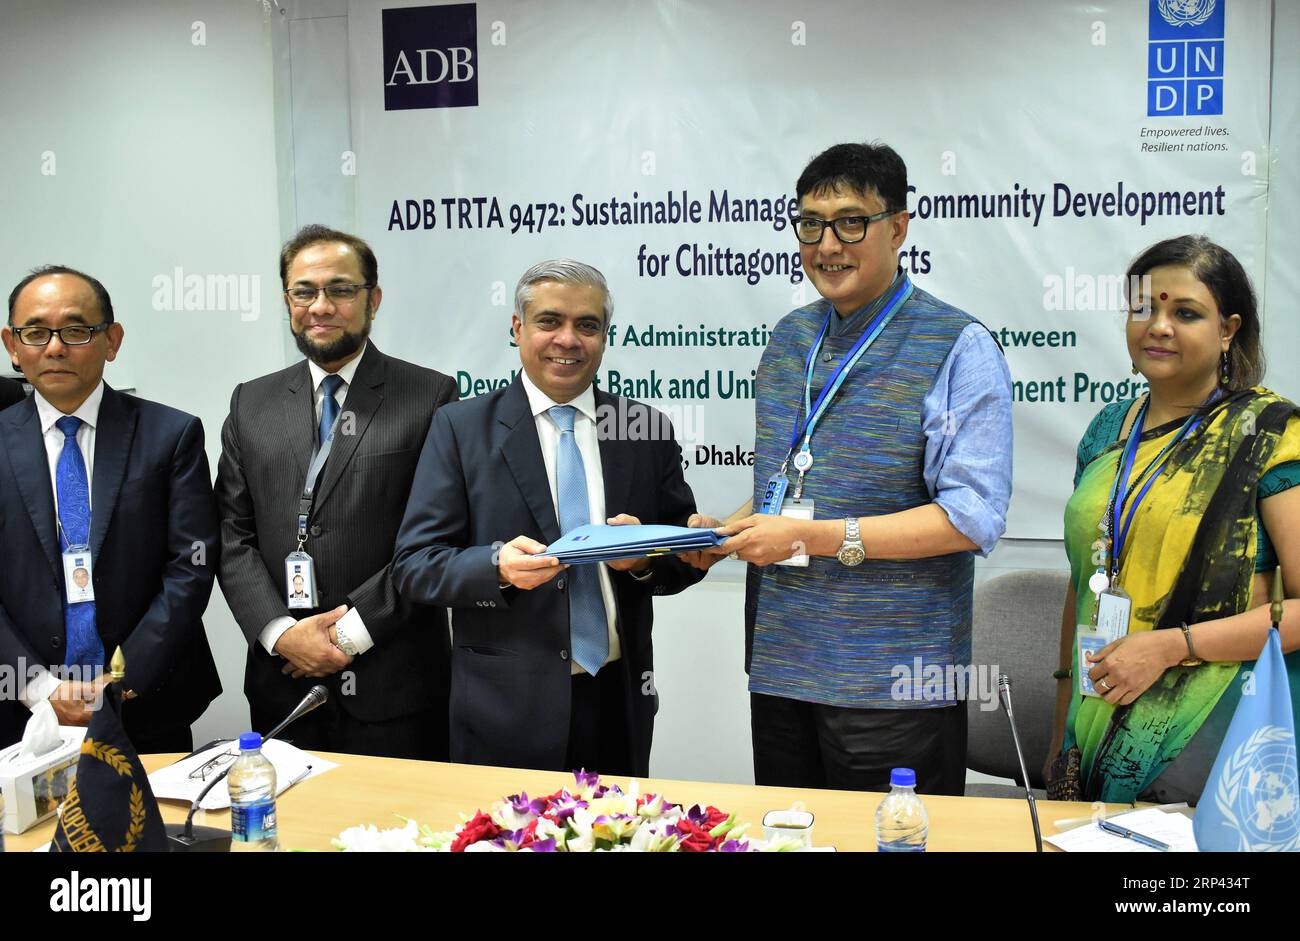 (181024) -- DHAKA, Oct. 24, 2018 -- Photo taken on Oct. 23, 2018 shows the signing ceremony of an administrative arrangement between the Asian Development Bank (ADB) and the UN Development Program(UNDP) in Dhaka, capital of Bangladesh. ADB and UNDP signed an administrative arrangement Tuesday to promote sustainable management of community development in the Chattogram Hill Tracts (CHT) in the southern part of Bangladesh.) (yy) BANGLADESH-DHAKA-ADB-UNDP-HILL TRIBES-PROMOTION JibonxAhsan PUBLICATIONxNOTxINxCHN Stock Photo